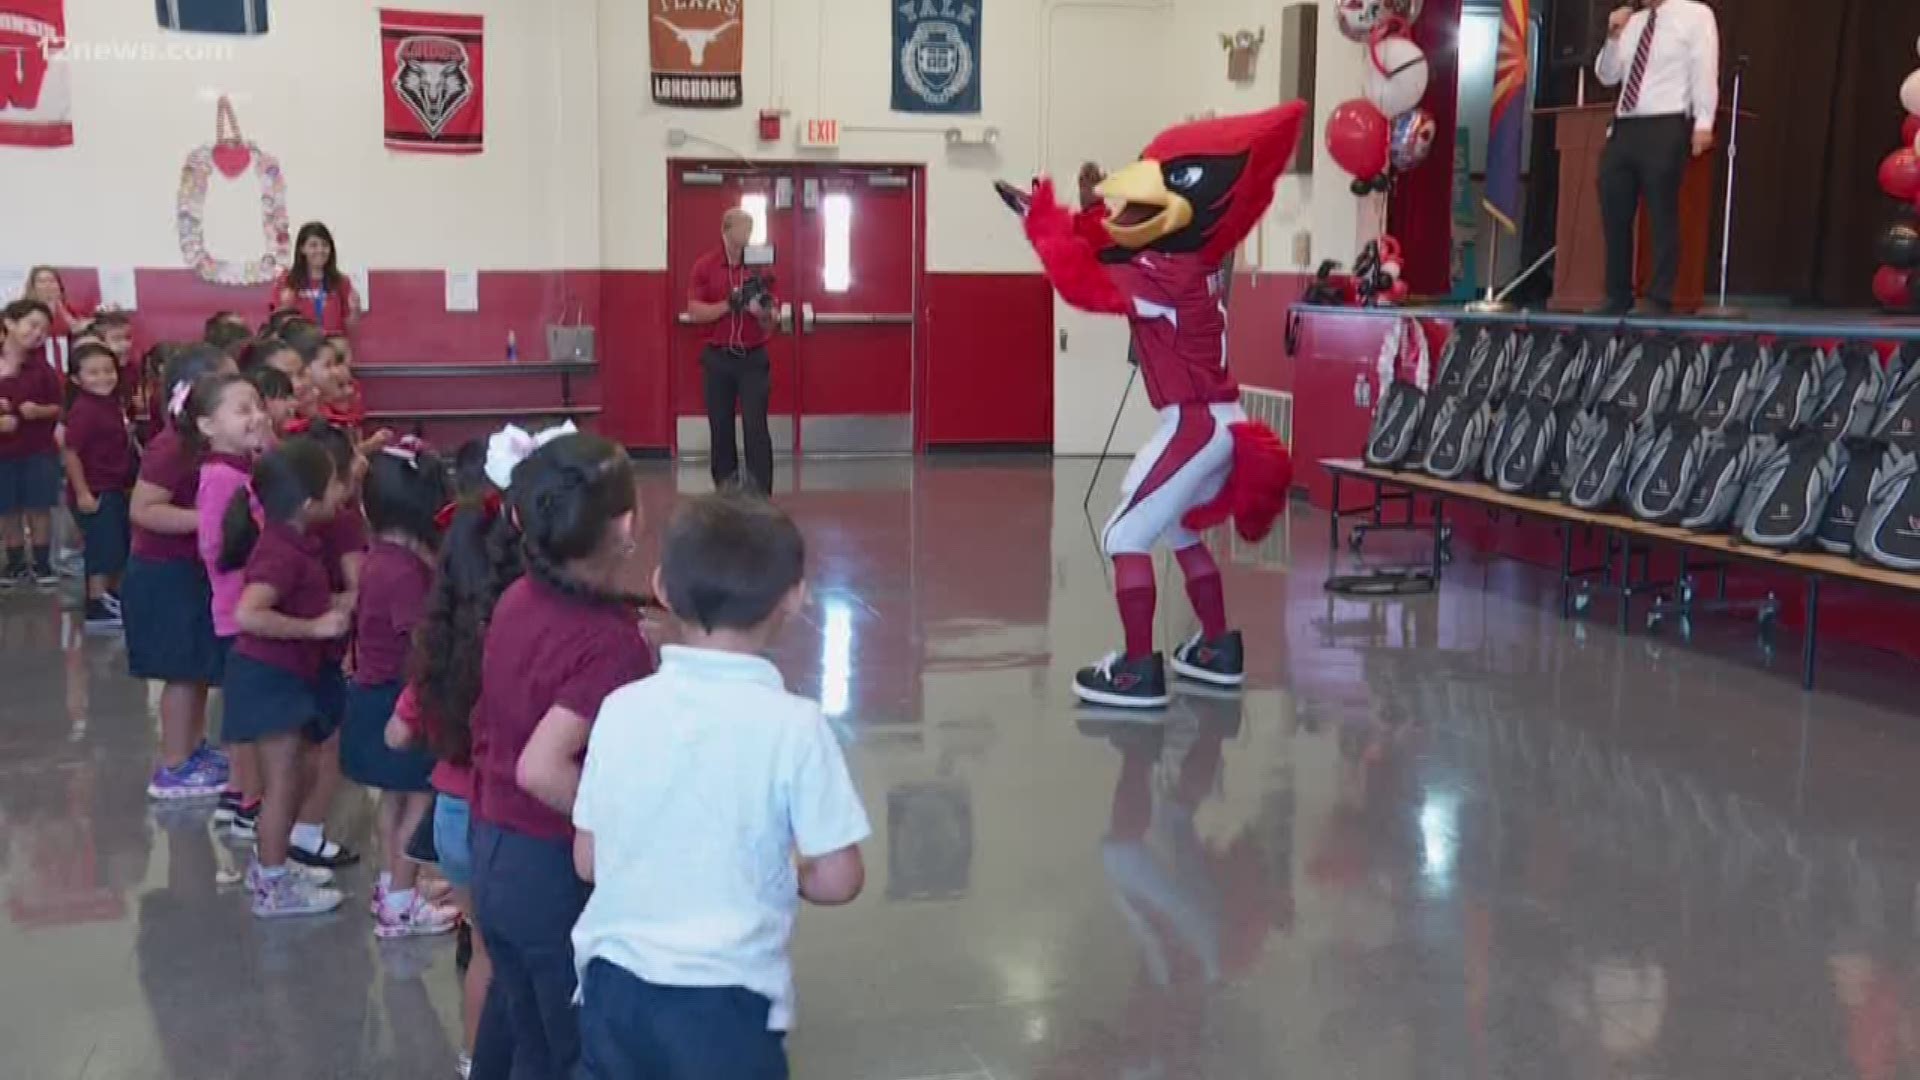 The Arizona Cardinals, along with Albertson's-Safeway and 12 News, paid a visit to J.B. Sutton Elementary School to give out Arizona Cardinals backpacks and give some much needed money for school supplies.